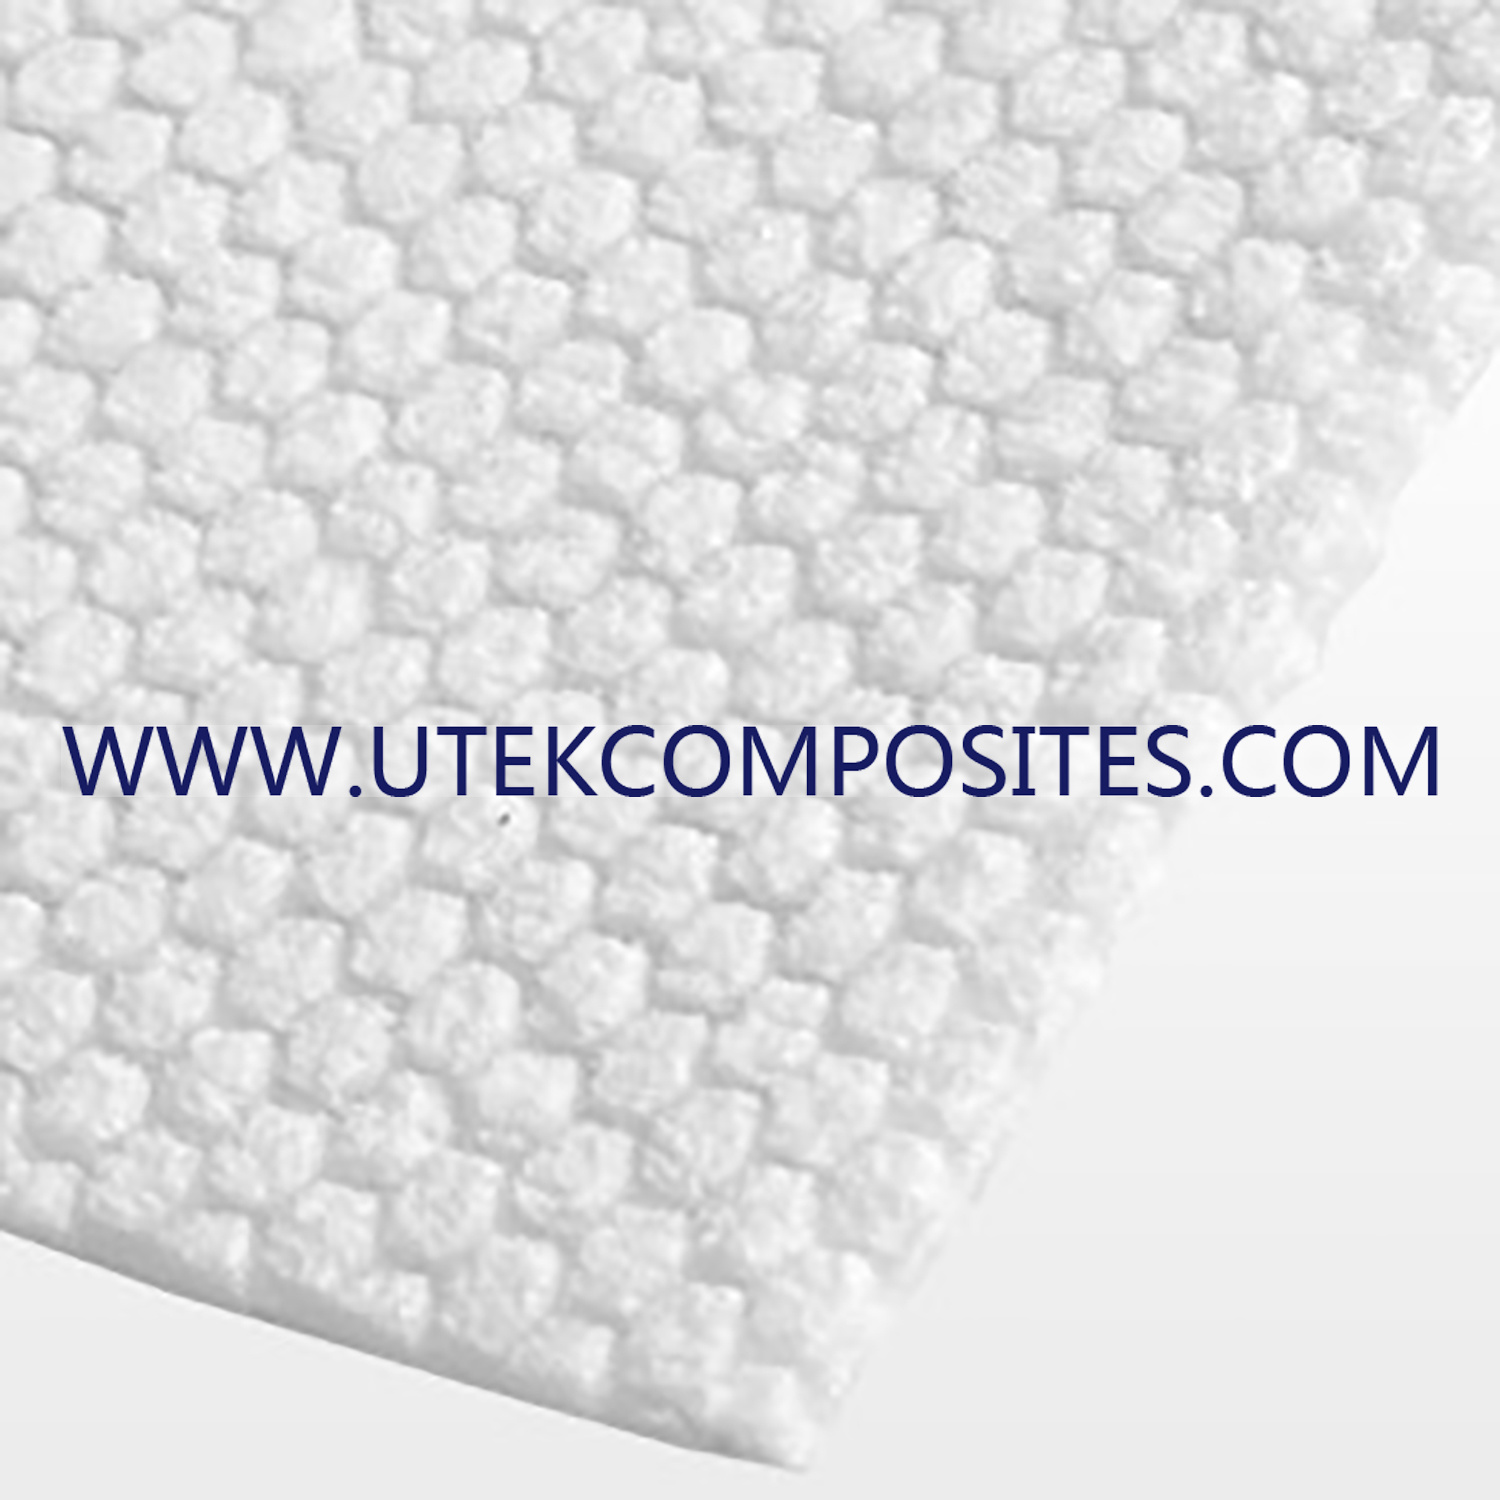 2mm-Thickness-Coremat-for-Infusion-for-Transportation (1).jpg